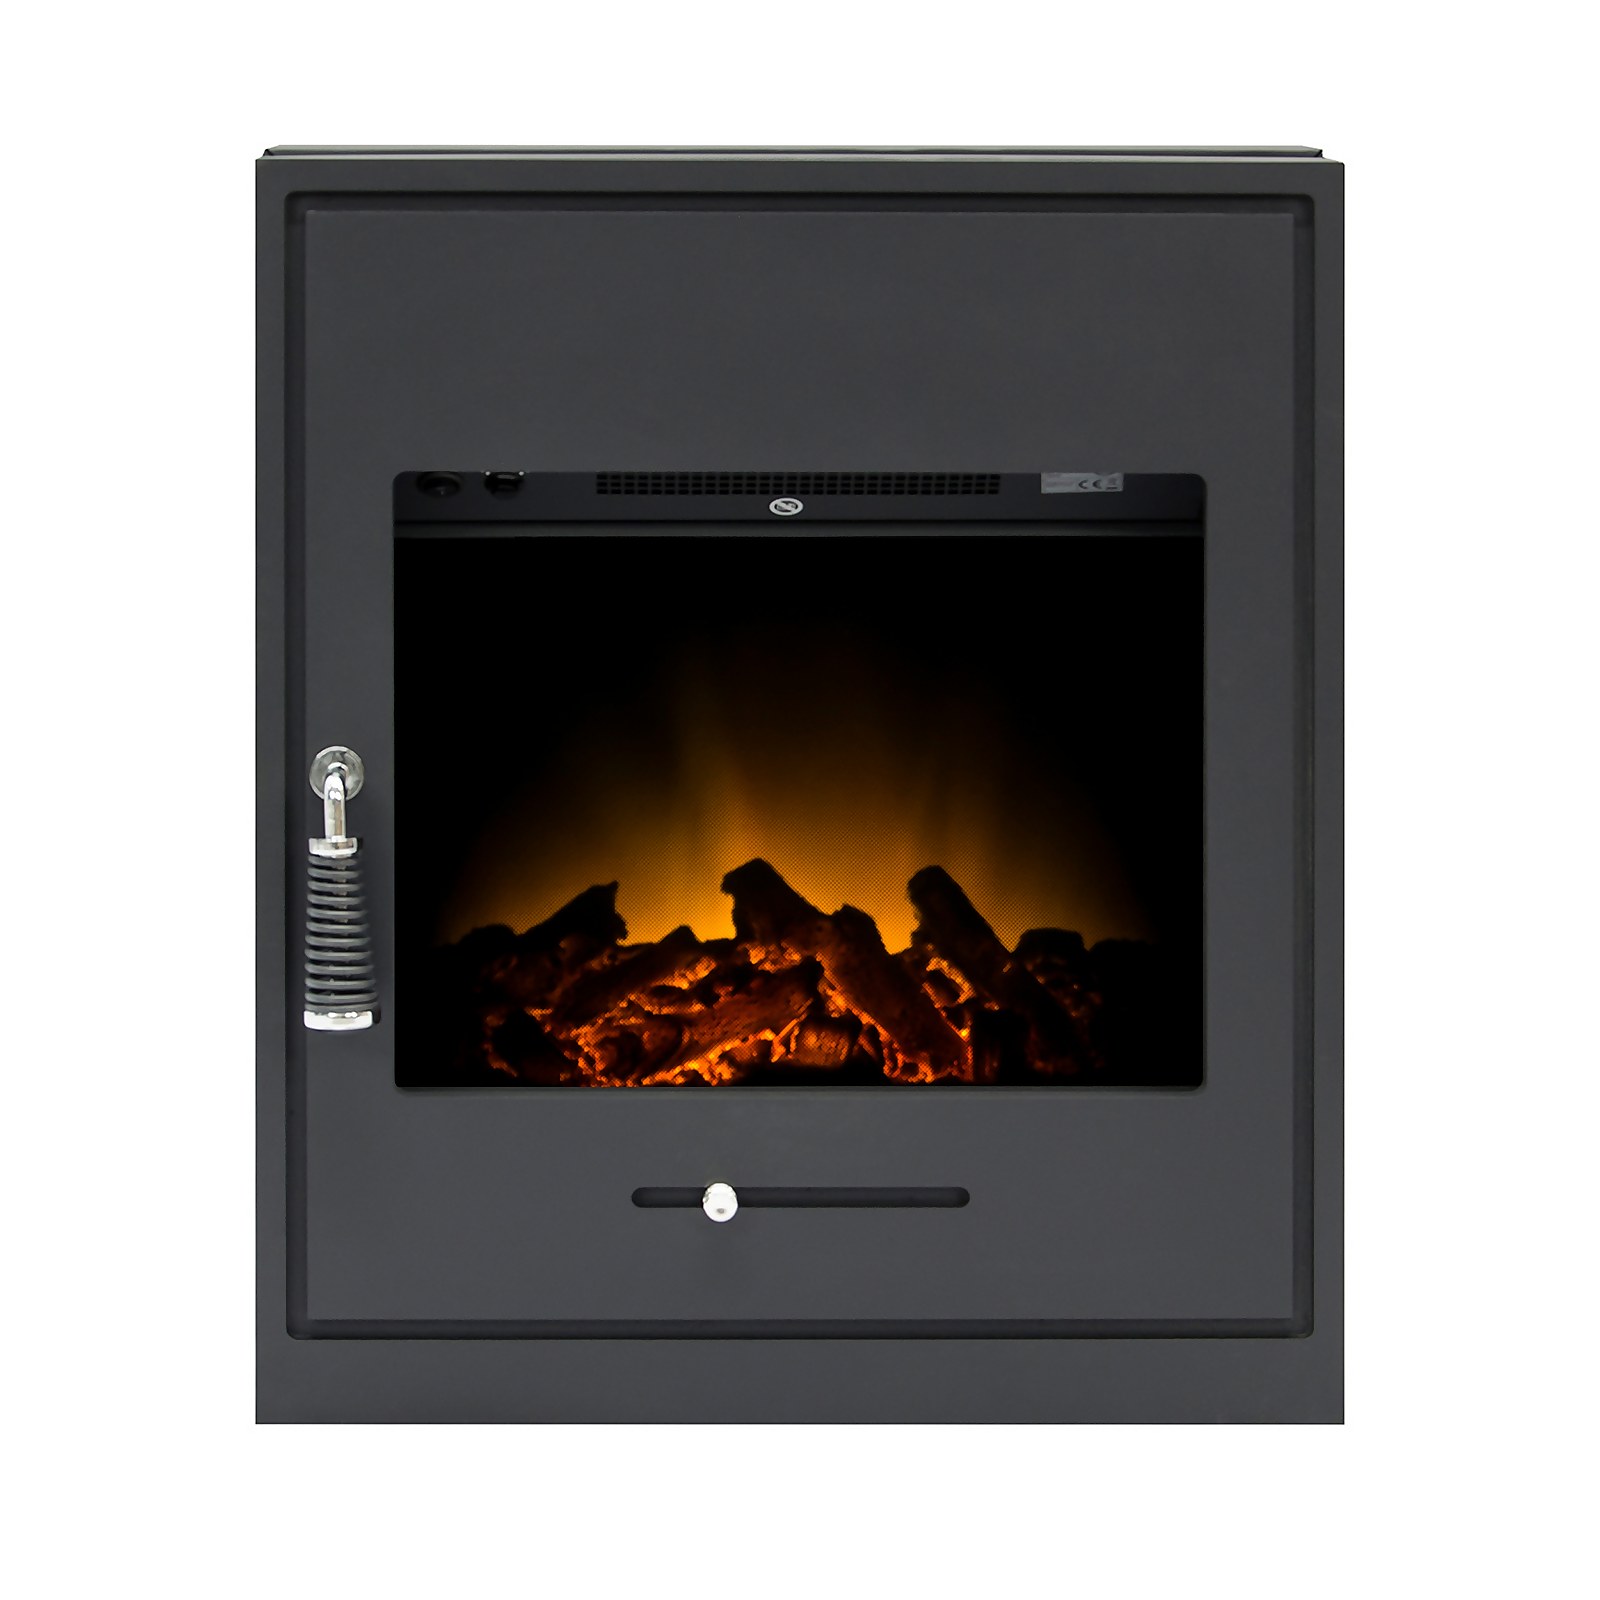 Adam Oslo Electric Stove with Inset Fitting & Remote Control - Black